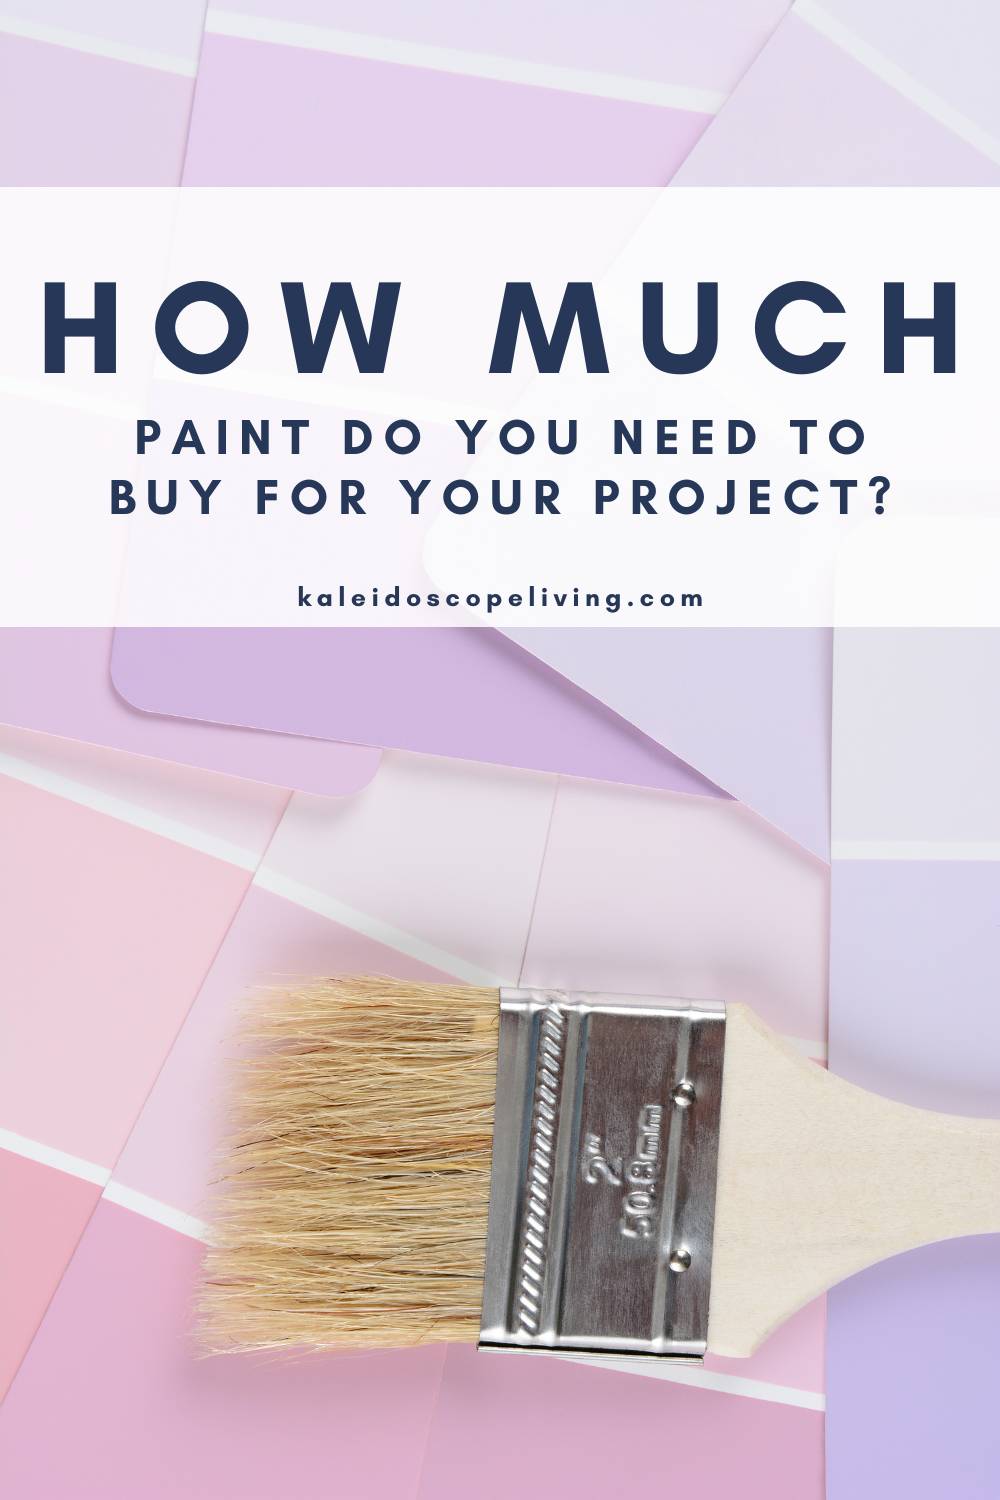 How Much Paint Do I Need for My Room?